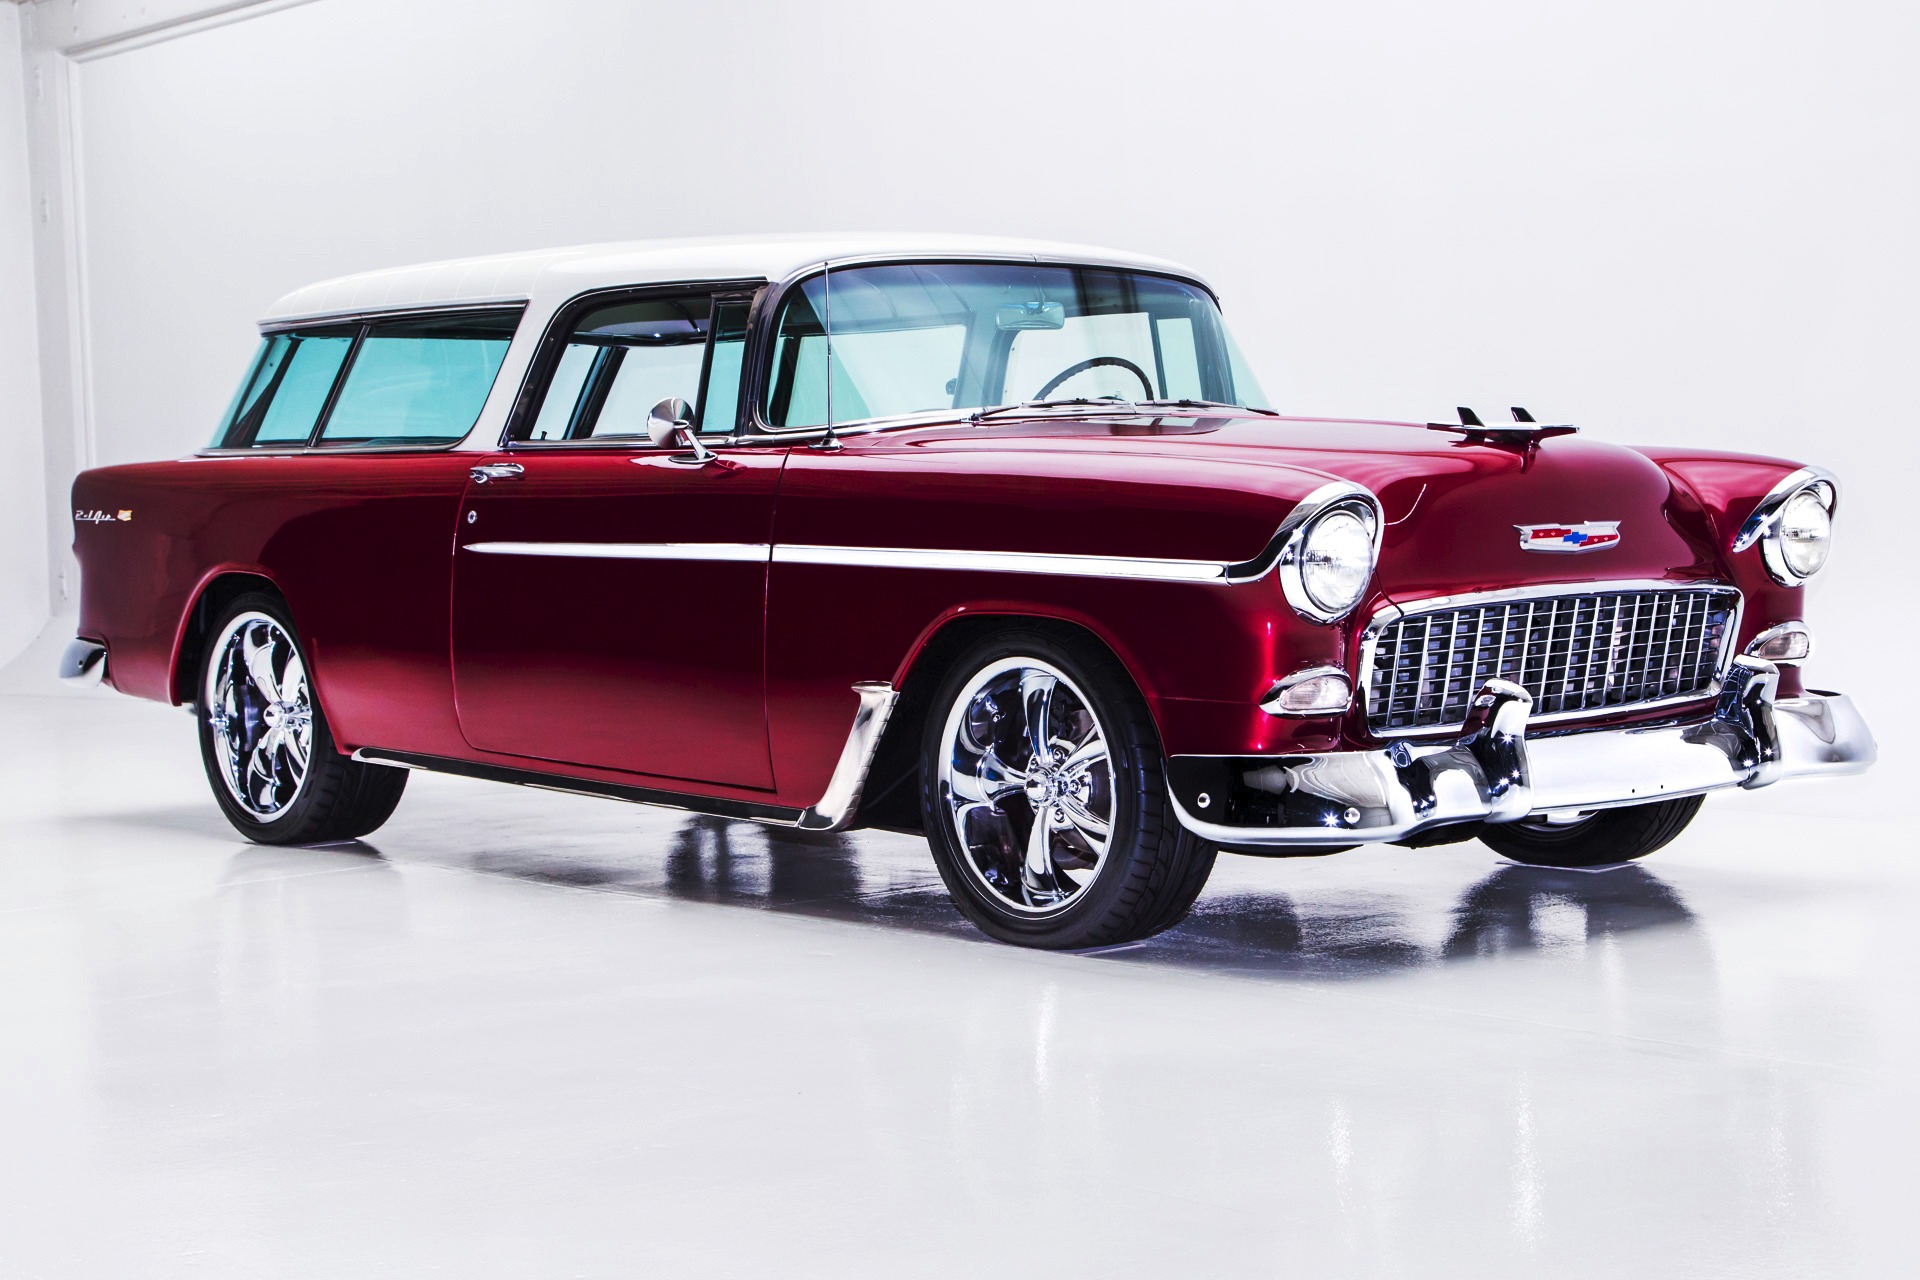 For Sale Used 1955 Chevrolet Nomad 468/450HP Auto AC | American Dream Machines Des Moines IA 50309